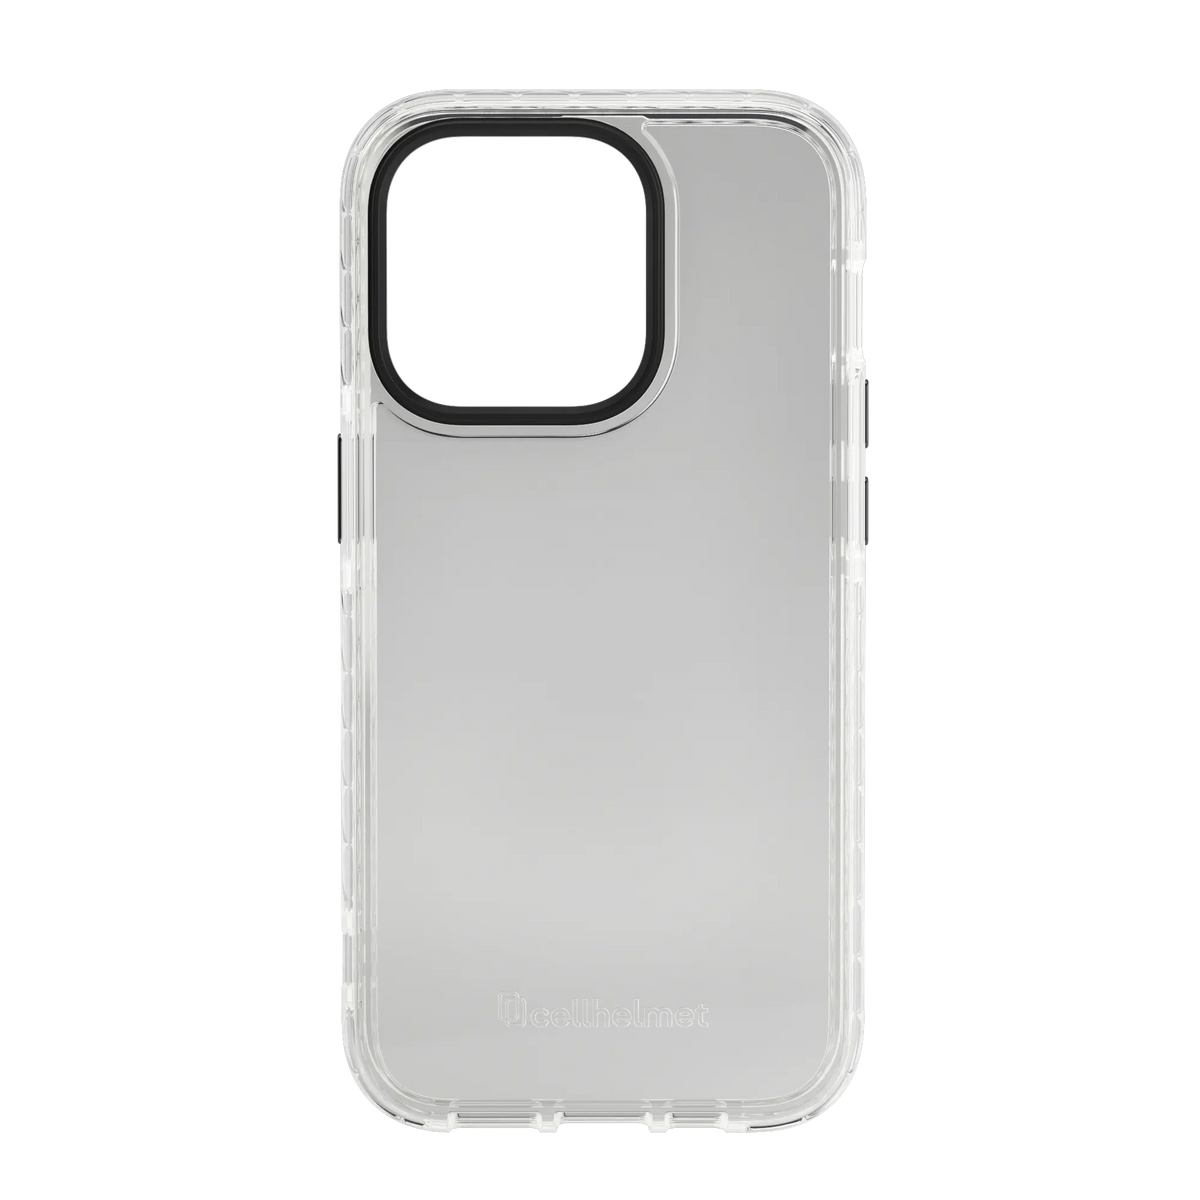 Altitude X Series for iPhone 14 Pro (6.1") 2022 (Crystal Clear) - Case -  - cellhelmet